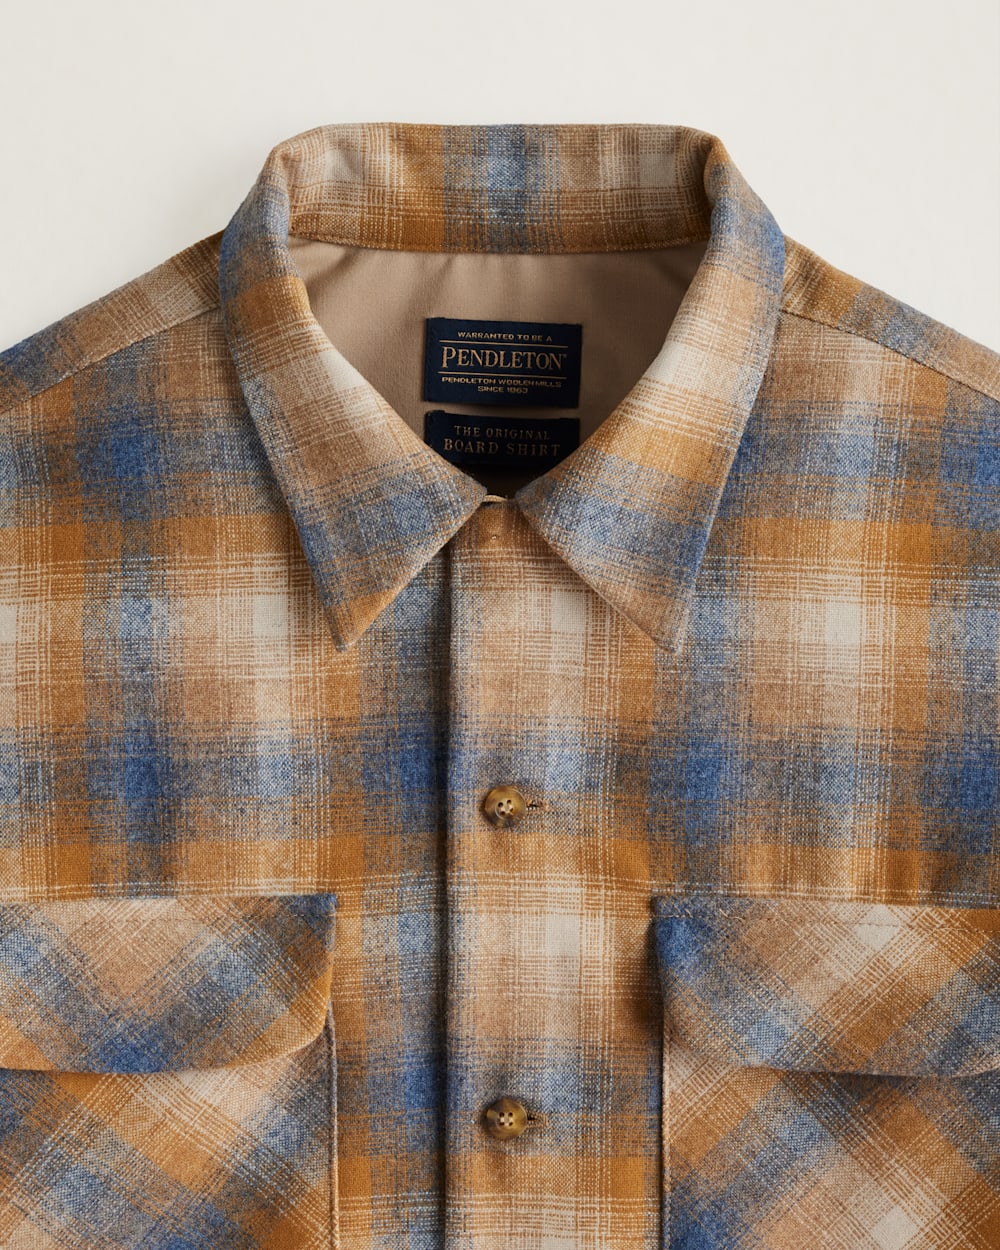 ALTERNATE VIEW OF MEN'S BOARD SHIRT IN TAN/COPPER/BLUE PLAID image number 2